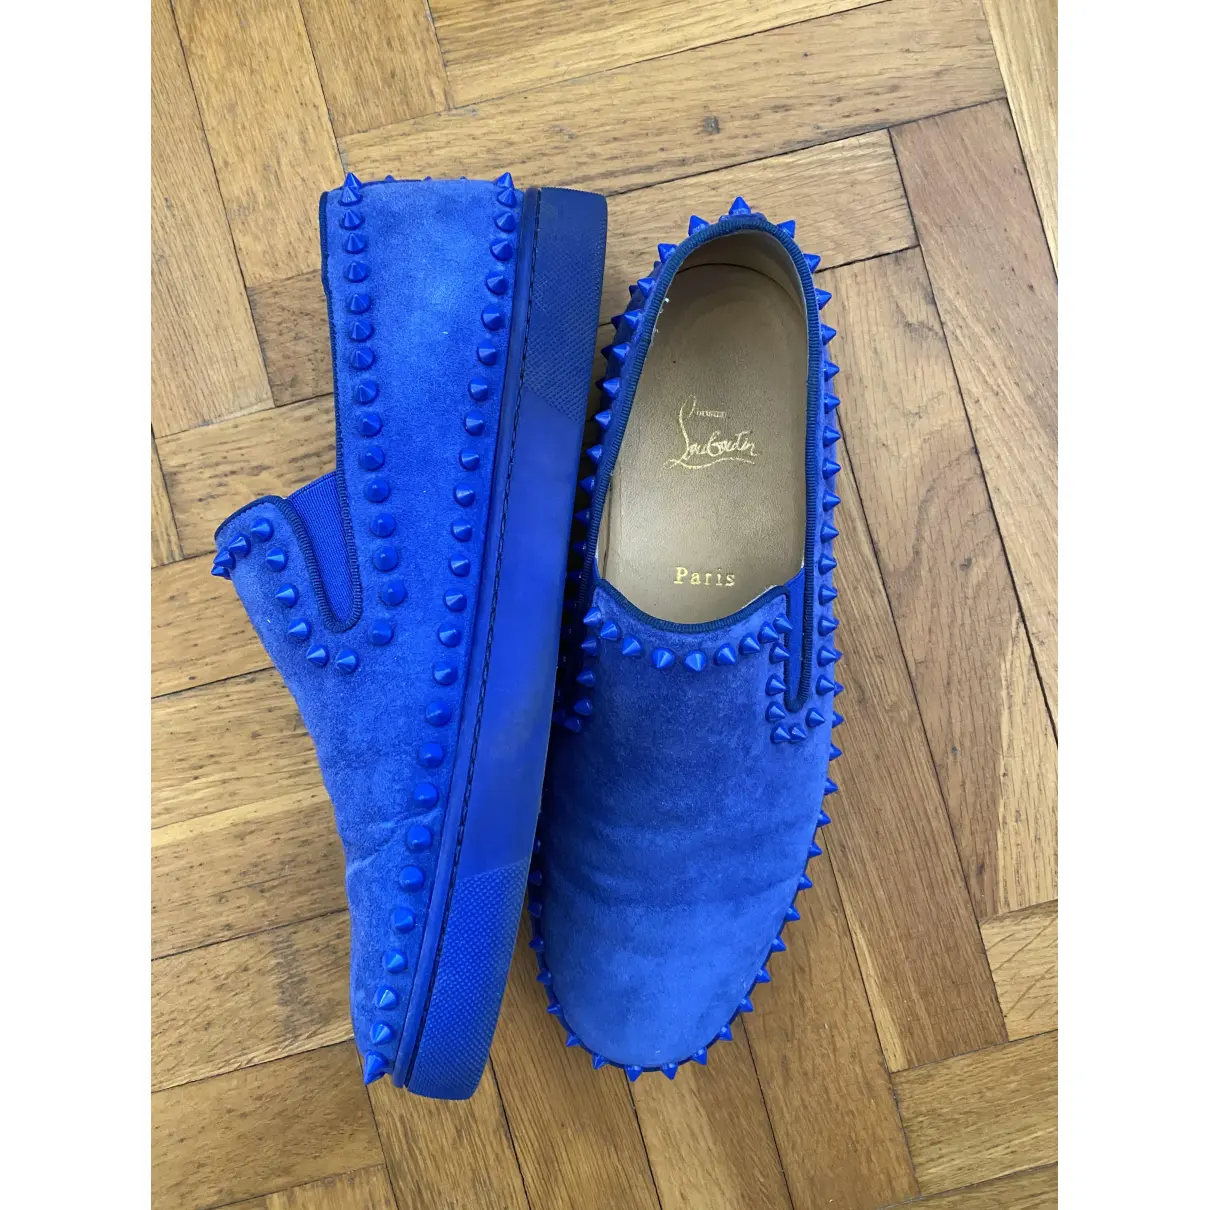 Buy Christian Louboutin Roller Boat leather low trainers online